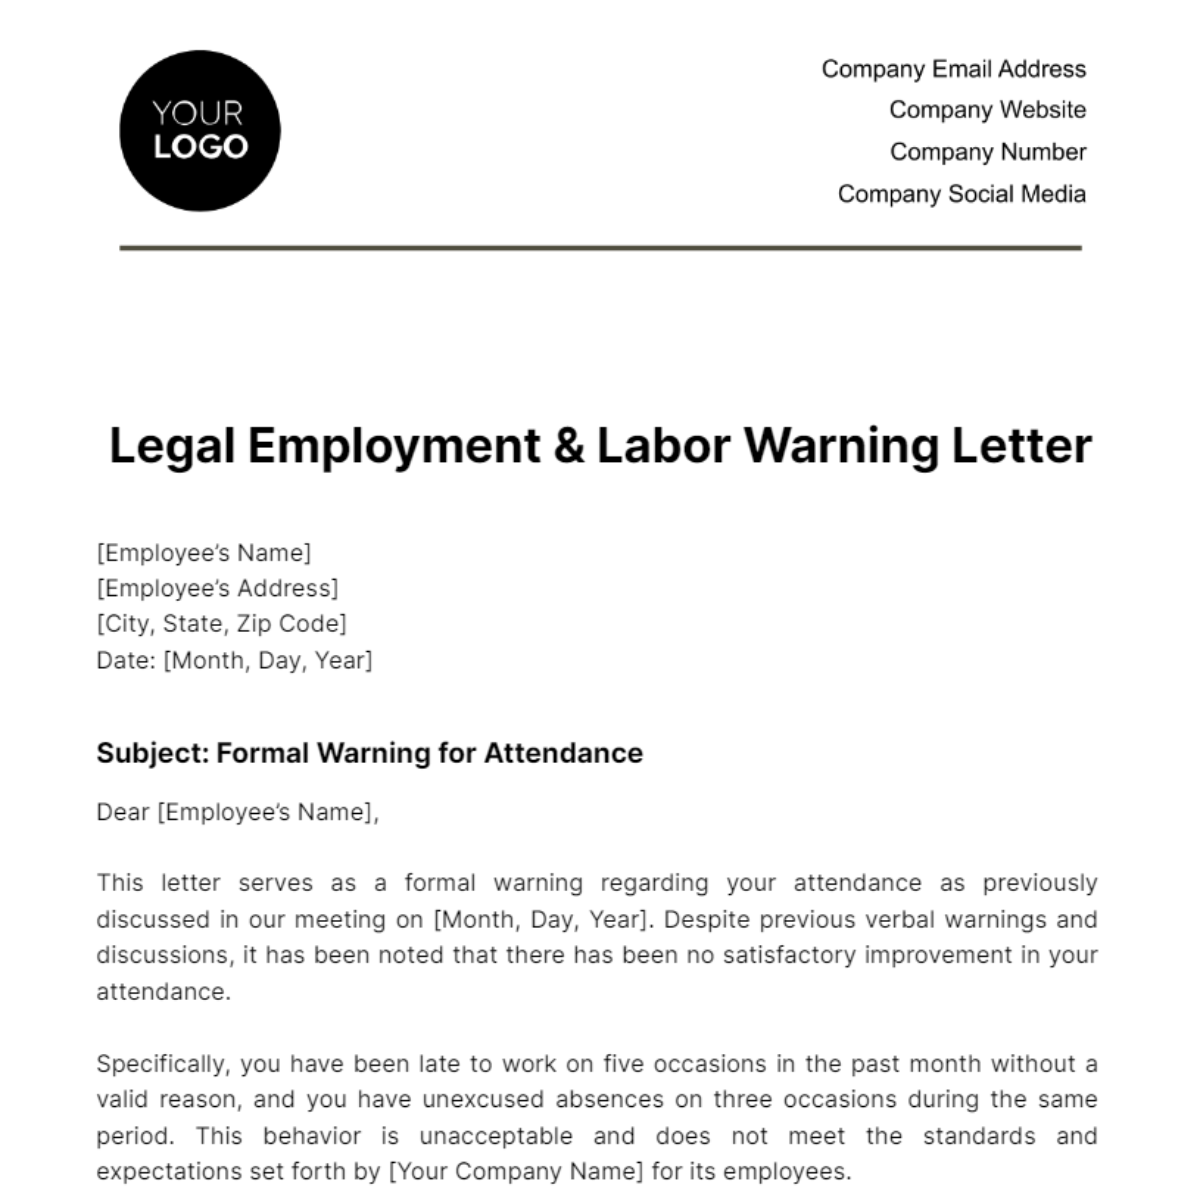 Free Legal Employment & Labor Warning Letter Template